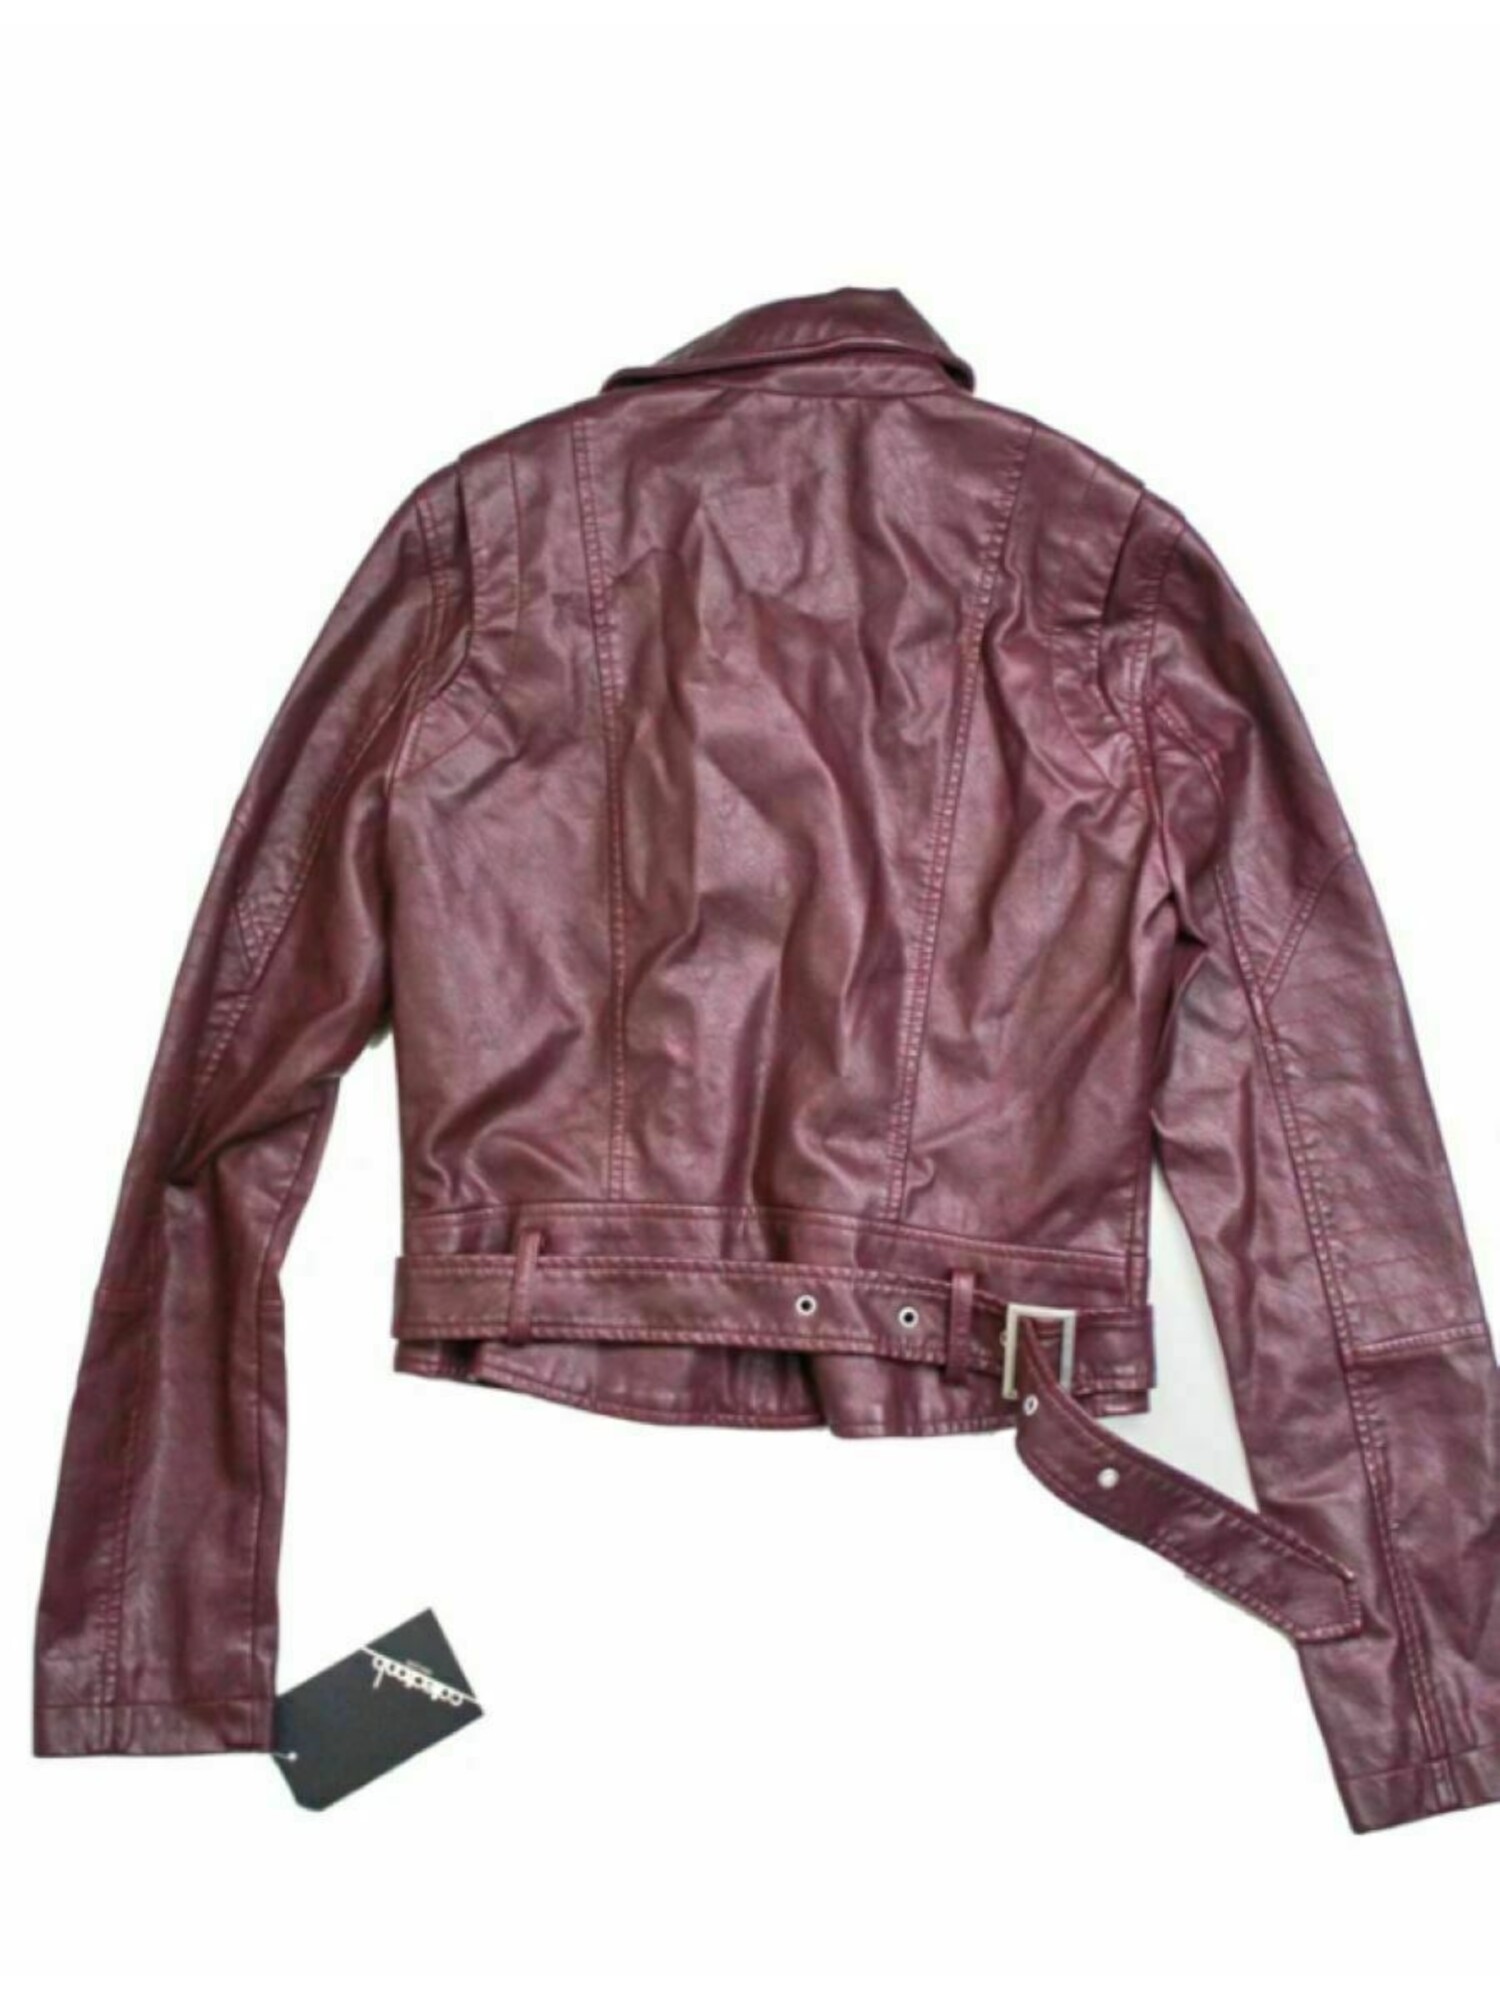 COLLECTIONB Womens Maroon Faux Leather Belted Zippered Motorcycle Coat M - image 1 of 2